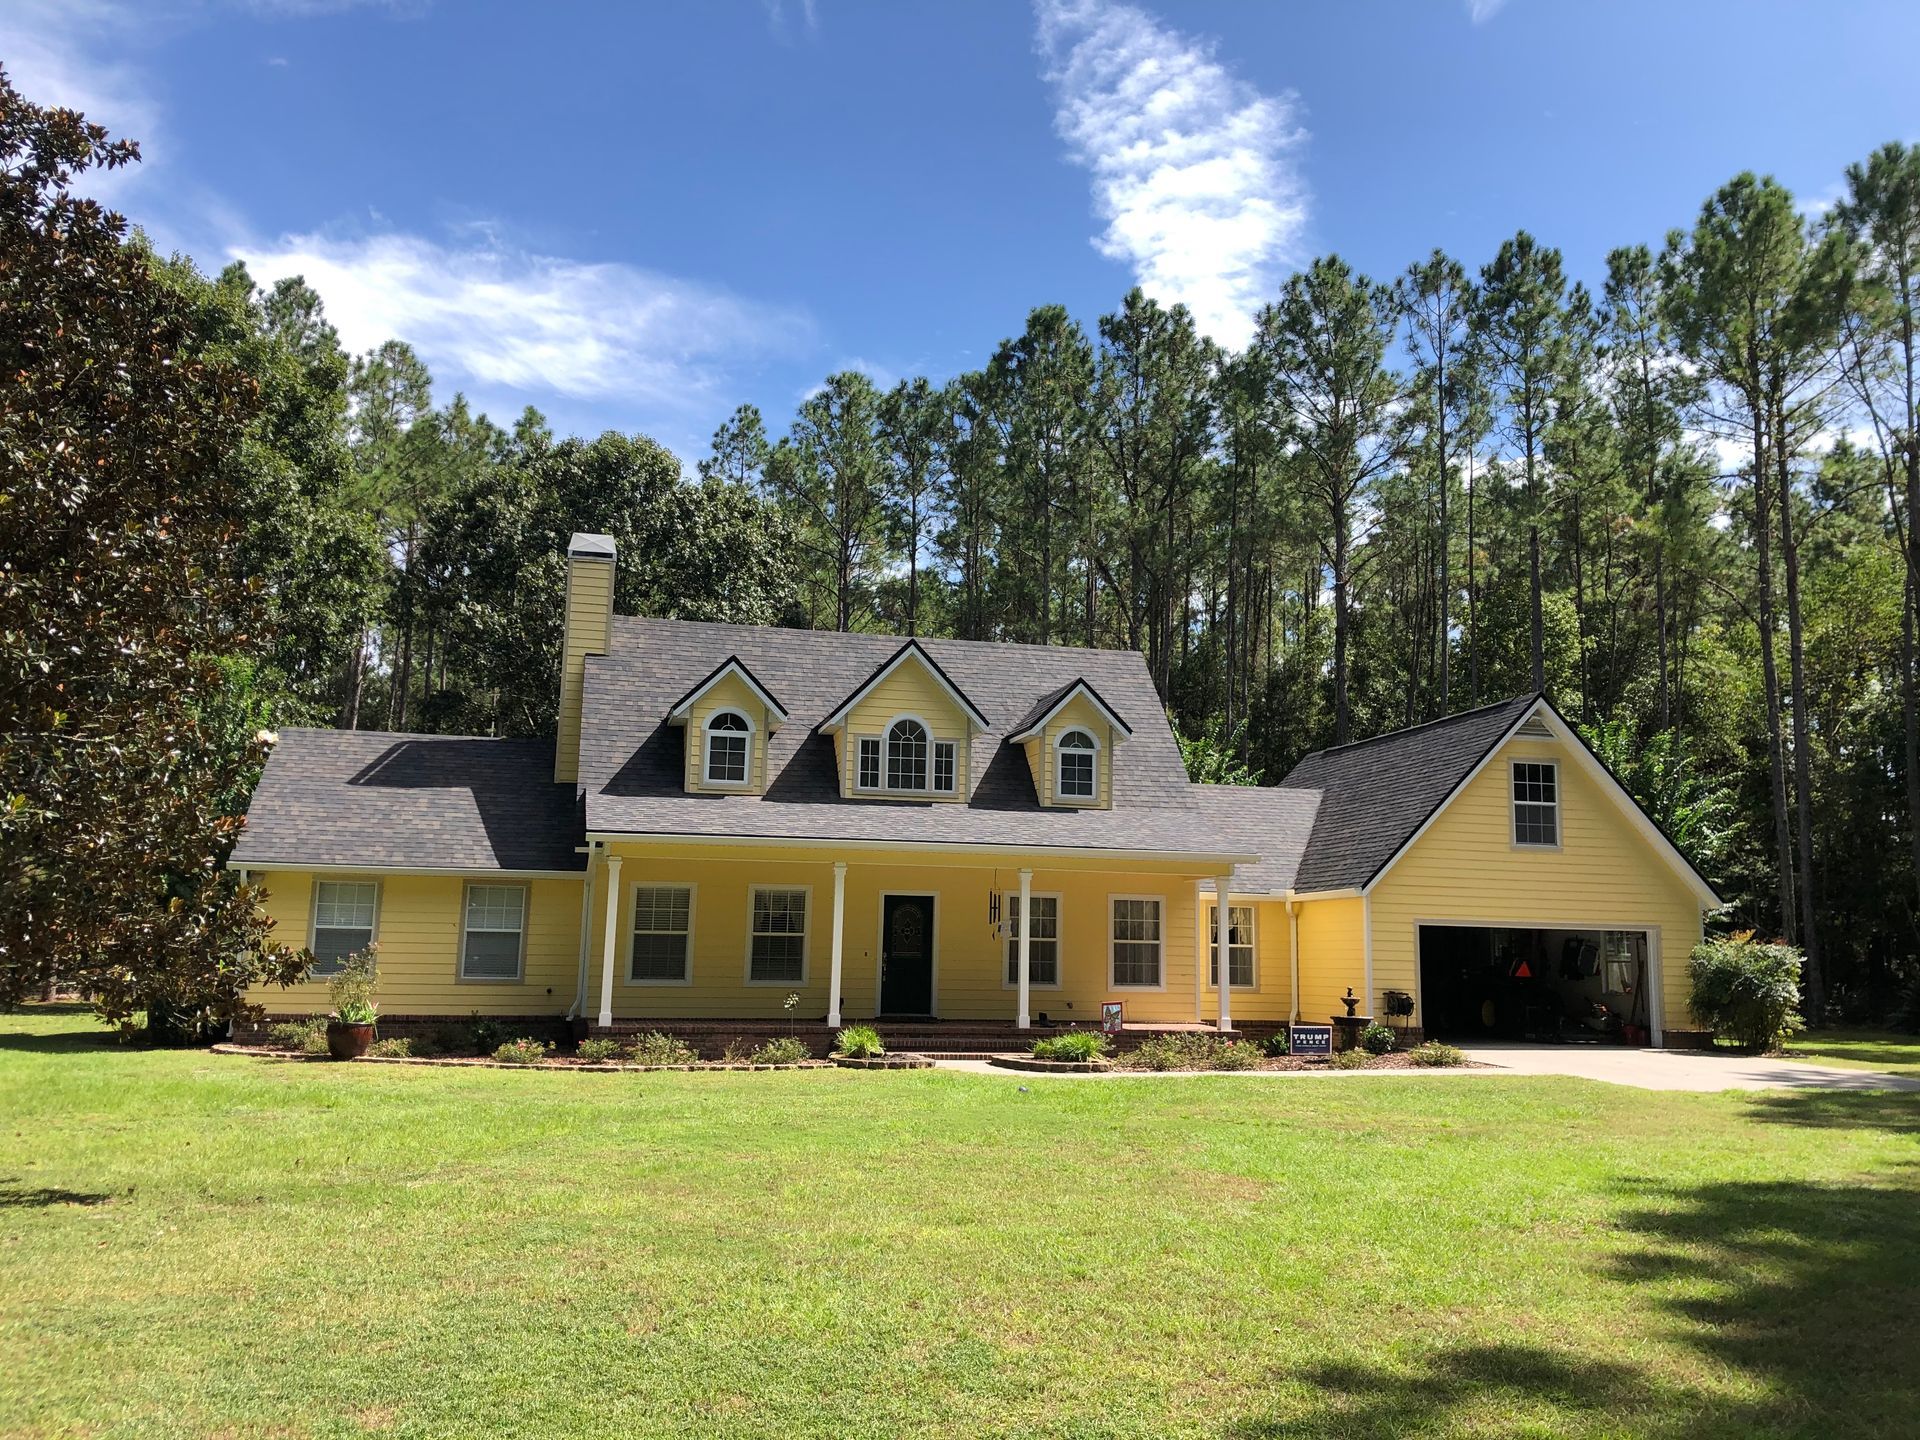 Residential property with yellow siding and shingle roofing in Gainesville